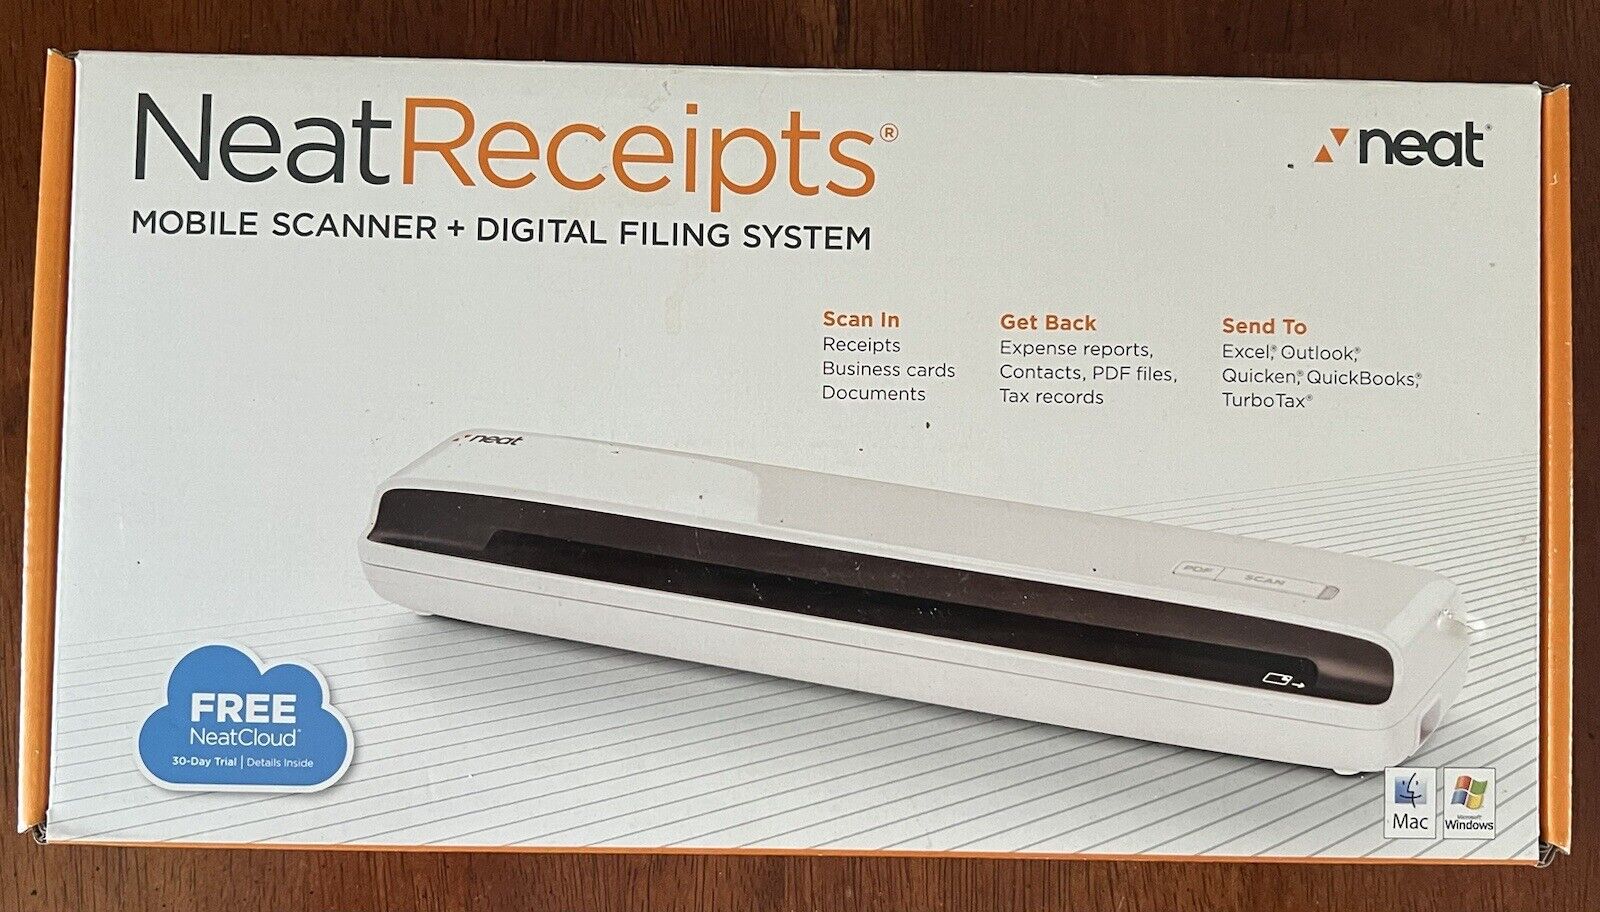 NeatReceipts NM-1000 Mobile Scanner for Receipts, Mac/Windows Complete, Open Box